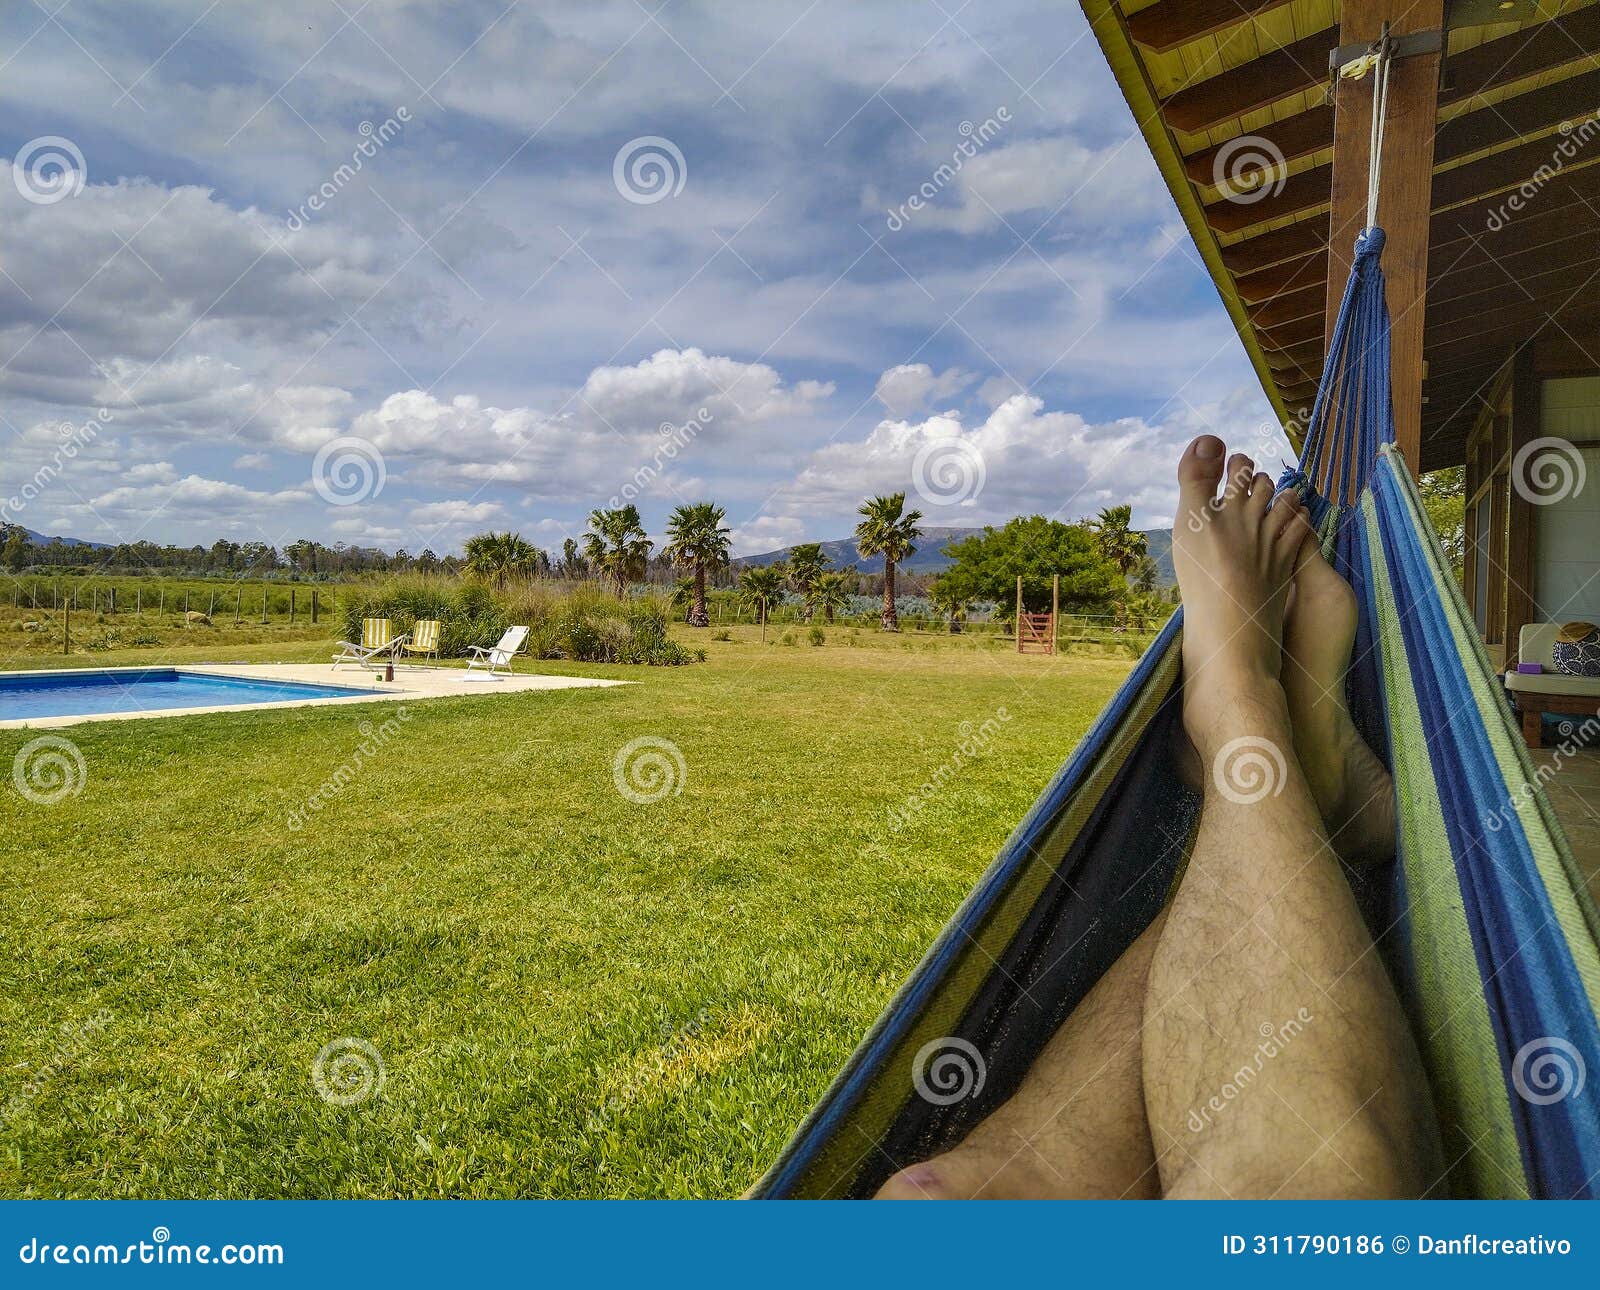 person on paraguayan hammock at countryside landscape